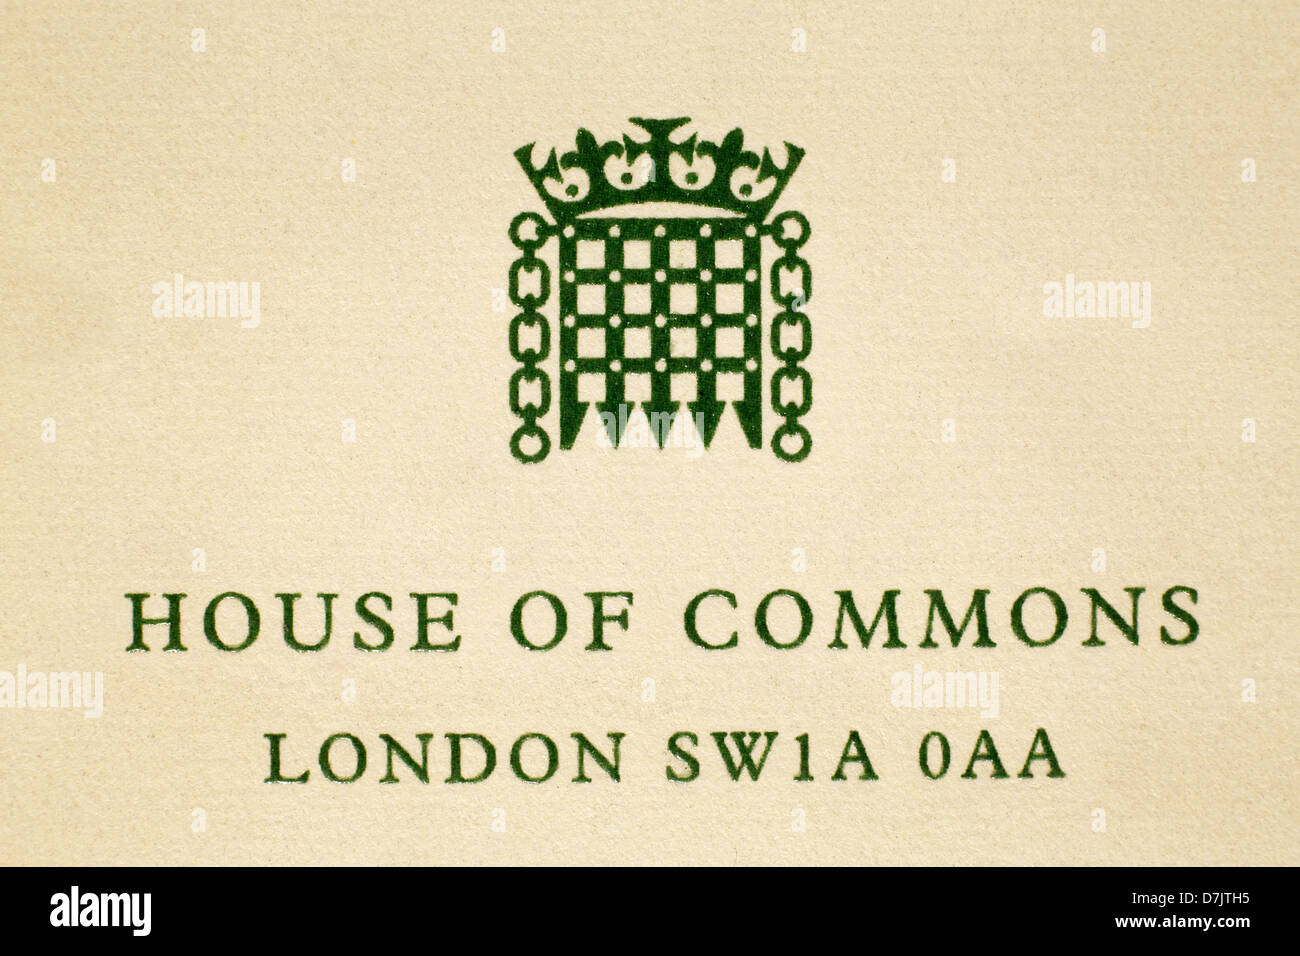 House of commons notepaper. Stock Photo